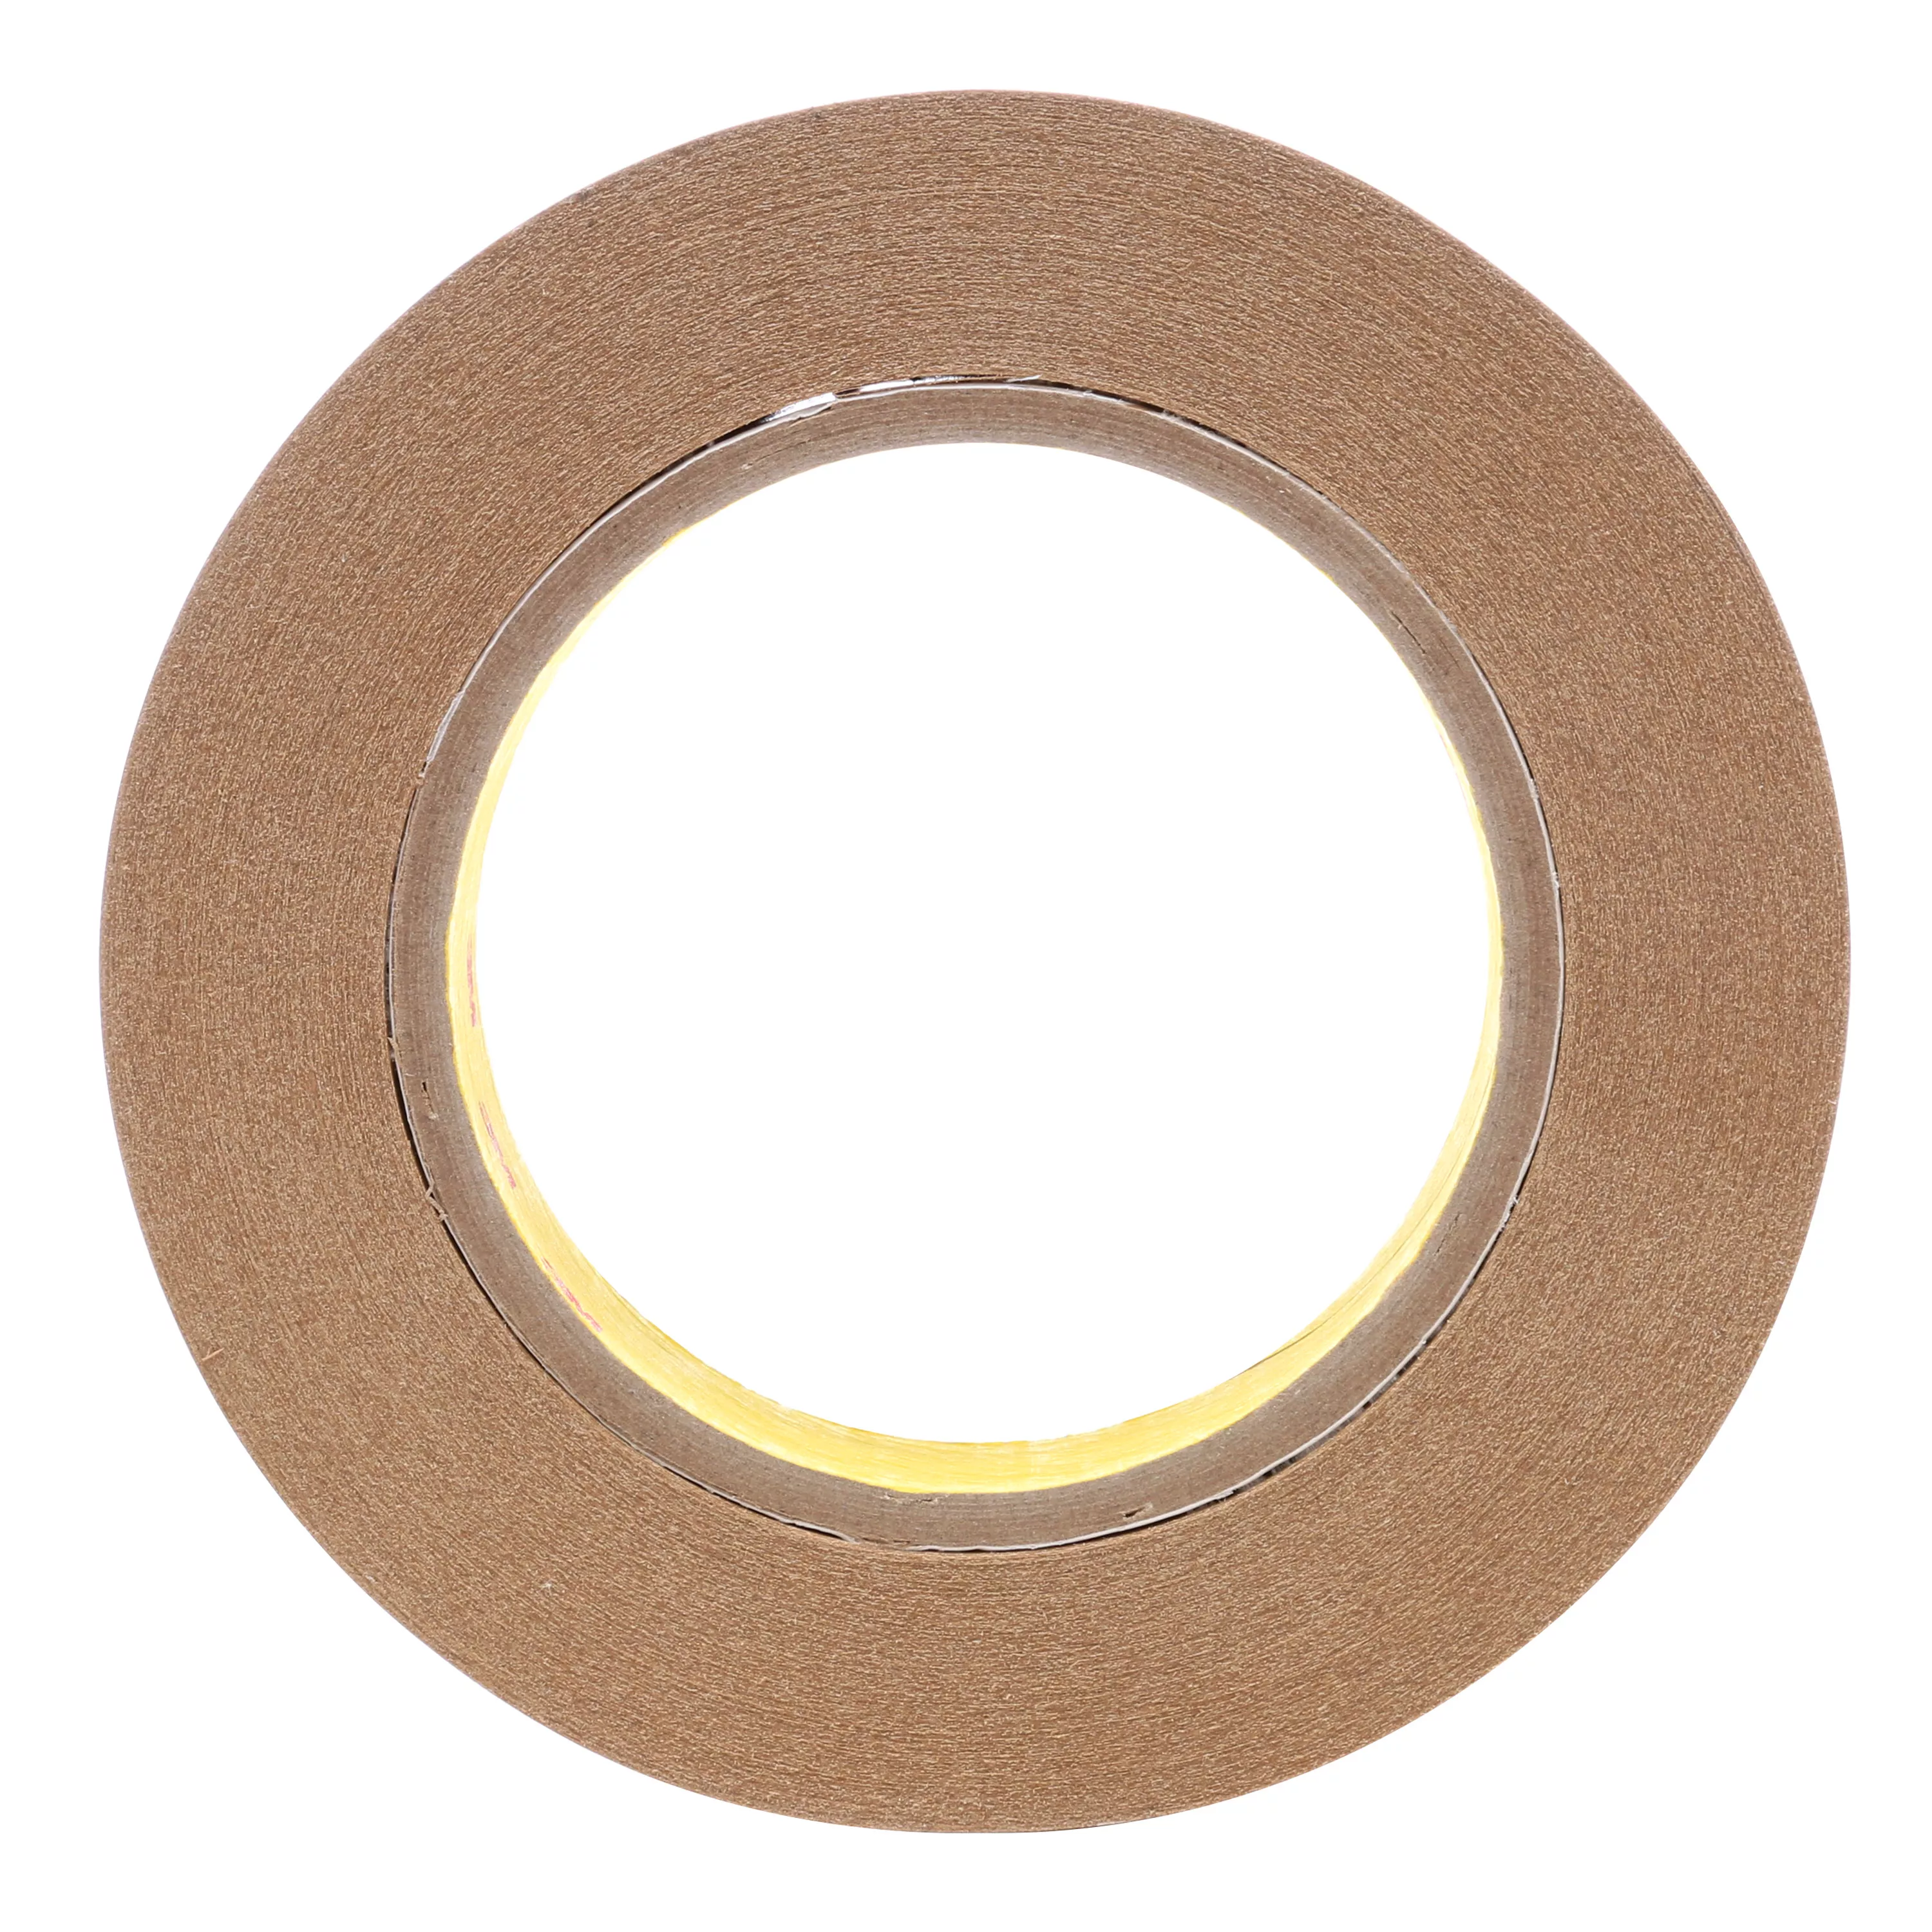 Product Number 465 | 3M™ Adhesive Transfer Tape 465